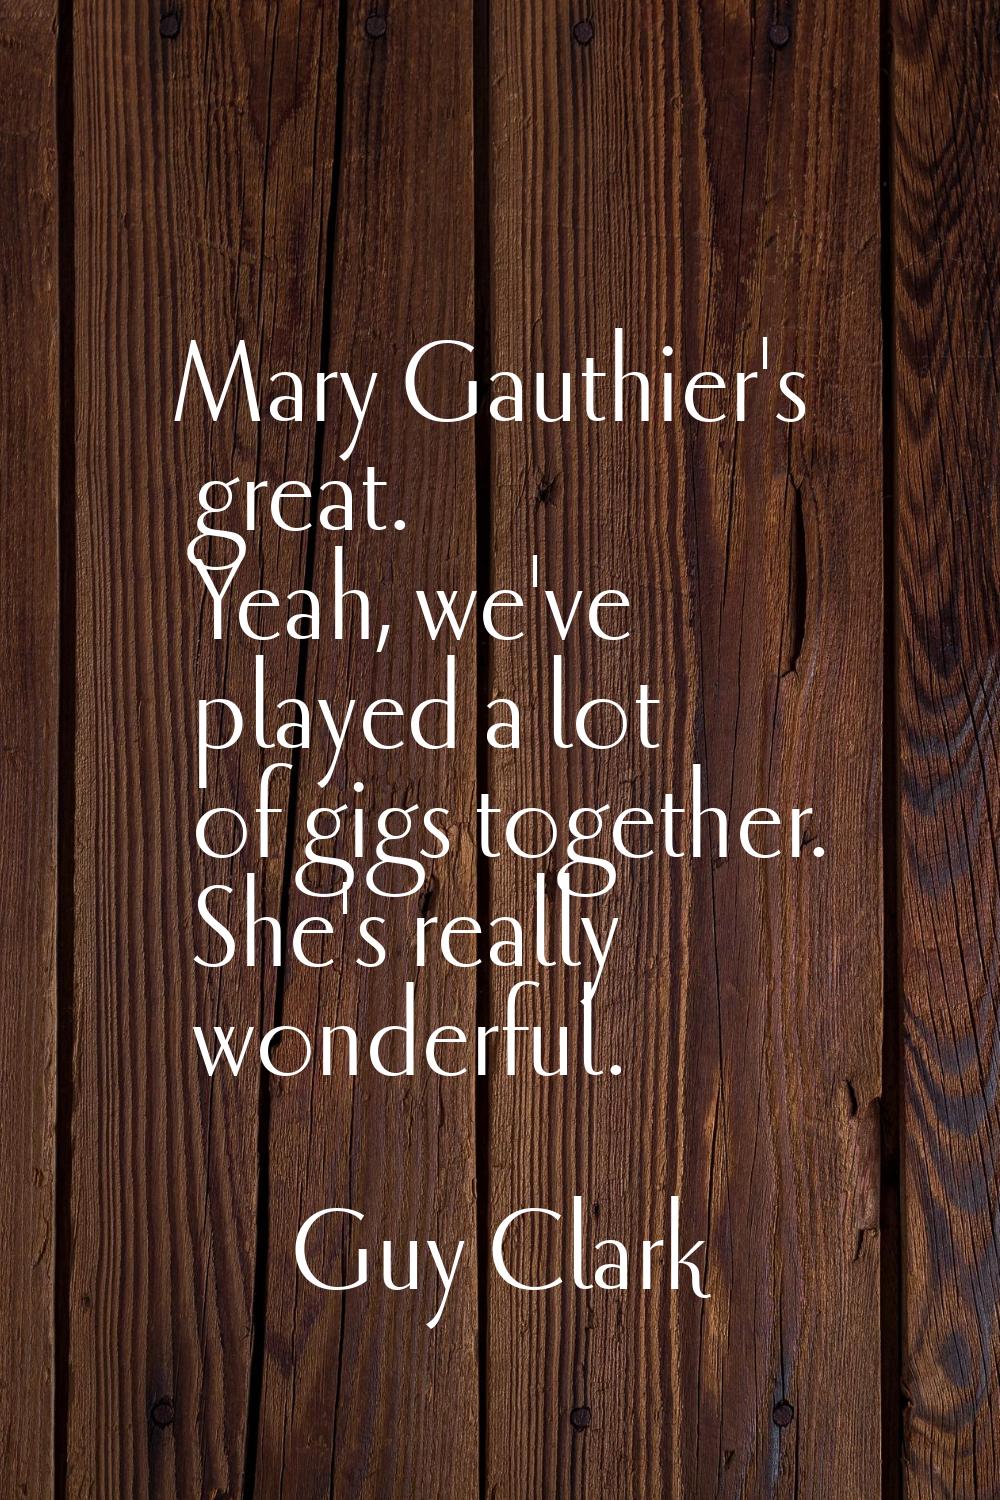 Mary Gauthier's great. Yeah, we've played a lot of gigs together. She's really wonderful.